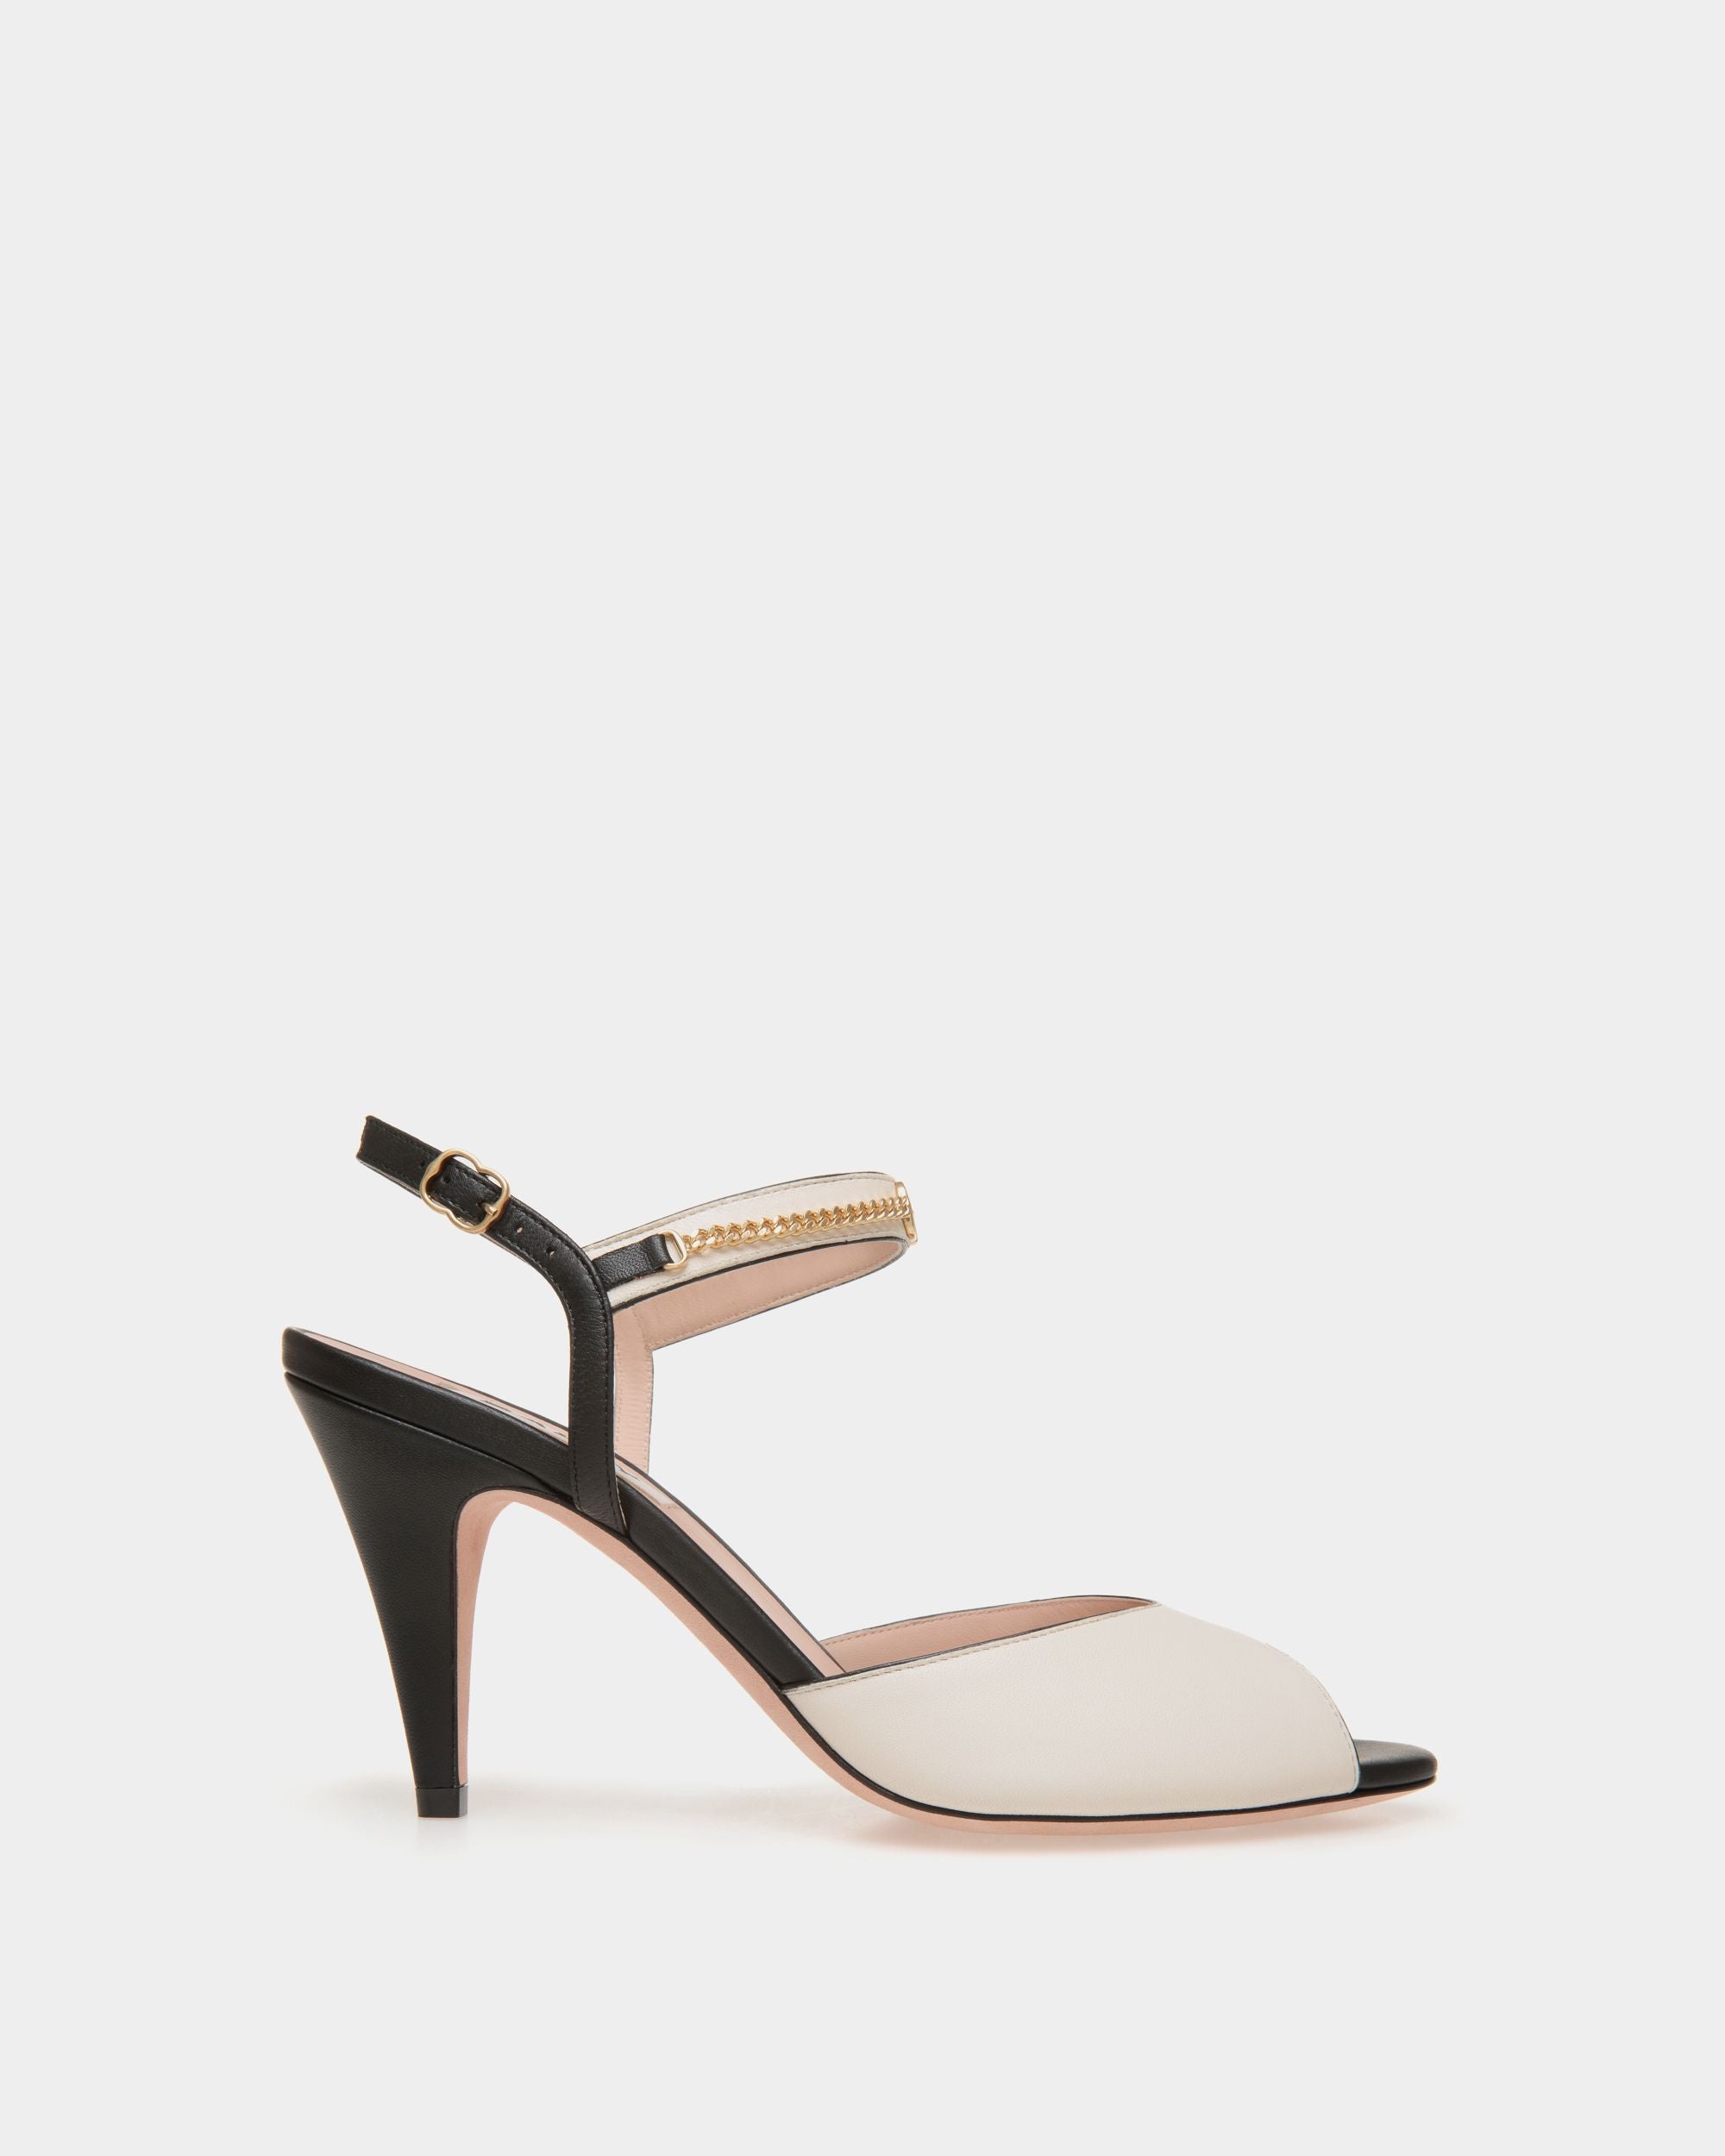 Daily Emblem | Women's Heeled Sandal in Black and White Leather | Bally | Still Life Side